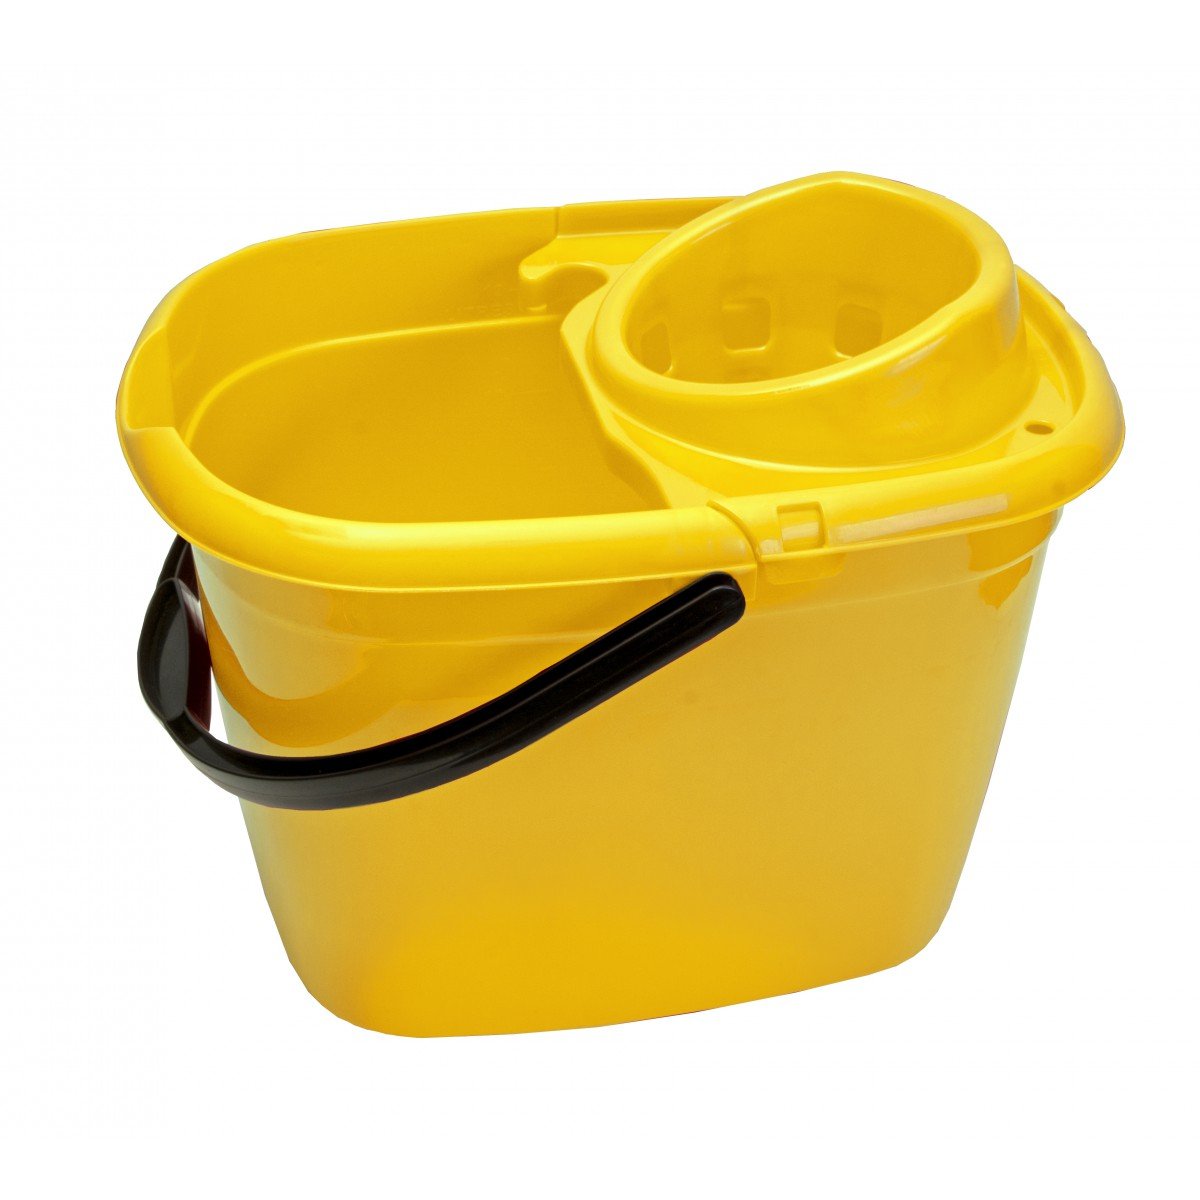 Vikan Plastic Mop Bucket with Plastic Handles and Strainer